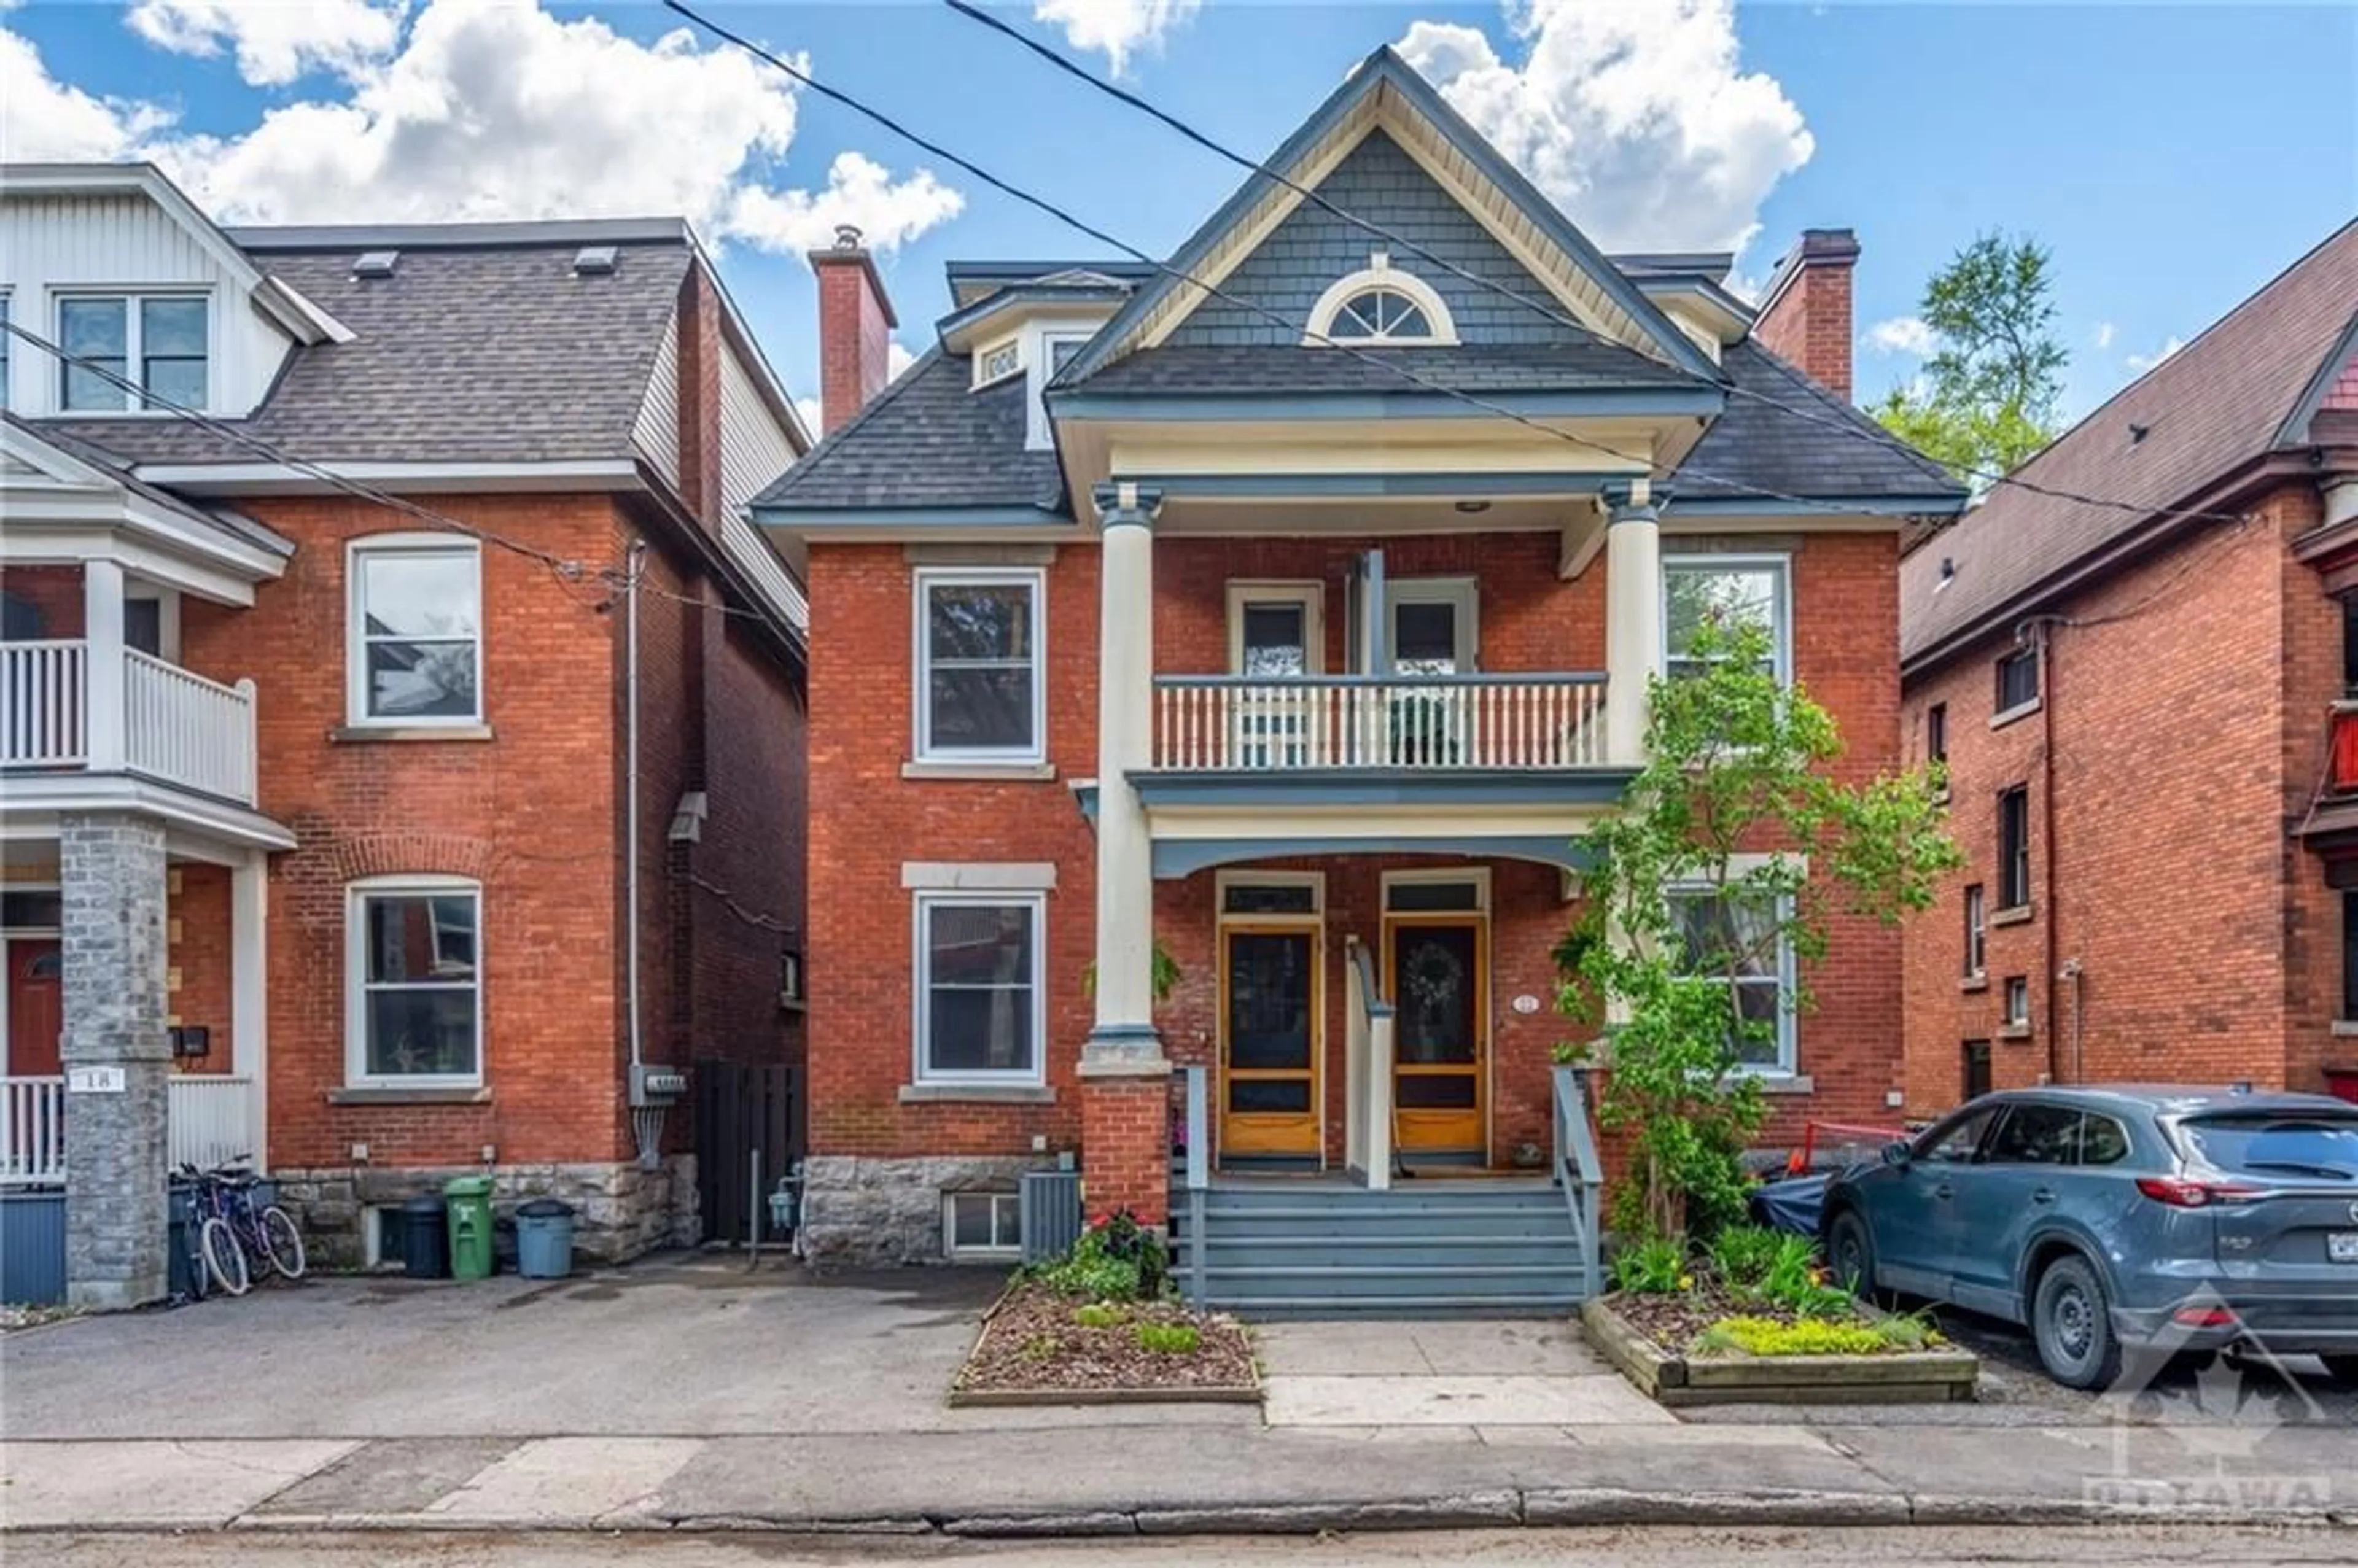 Home with brick exterior material for 20 REGENT St, Ottawa Ontario K1S 2R5